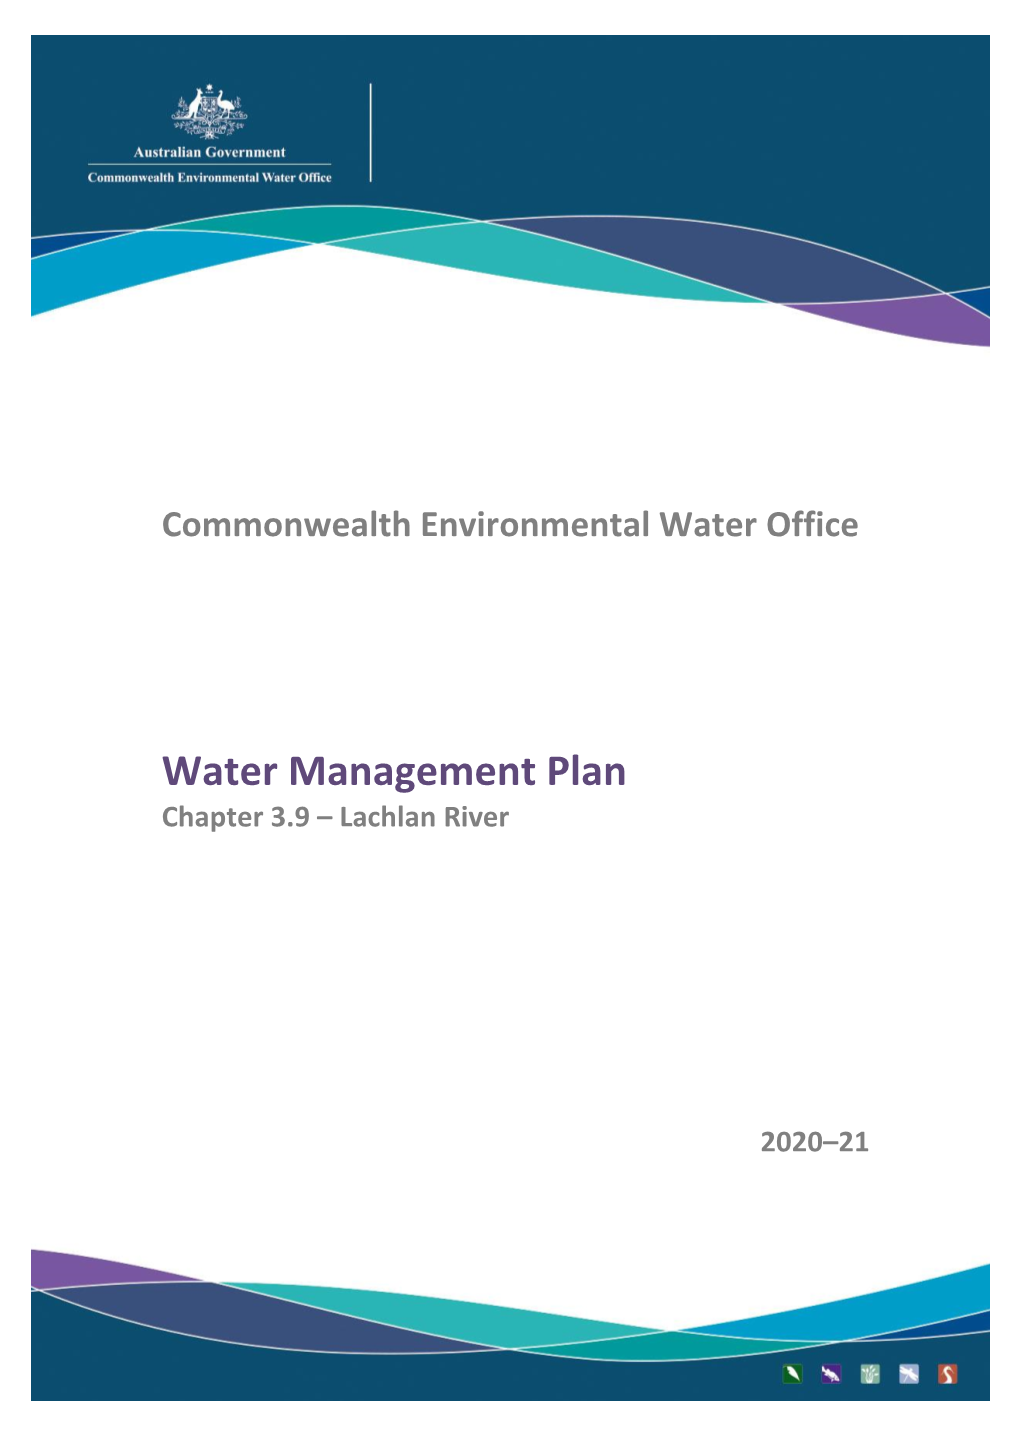 Water Management Plan 2020-21: Chapter